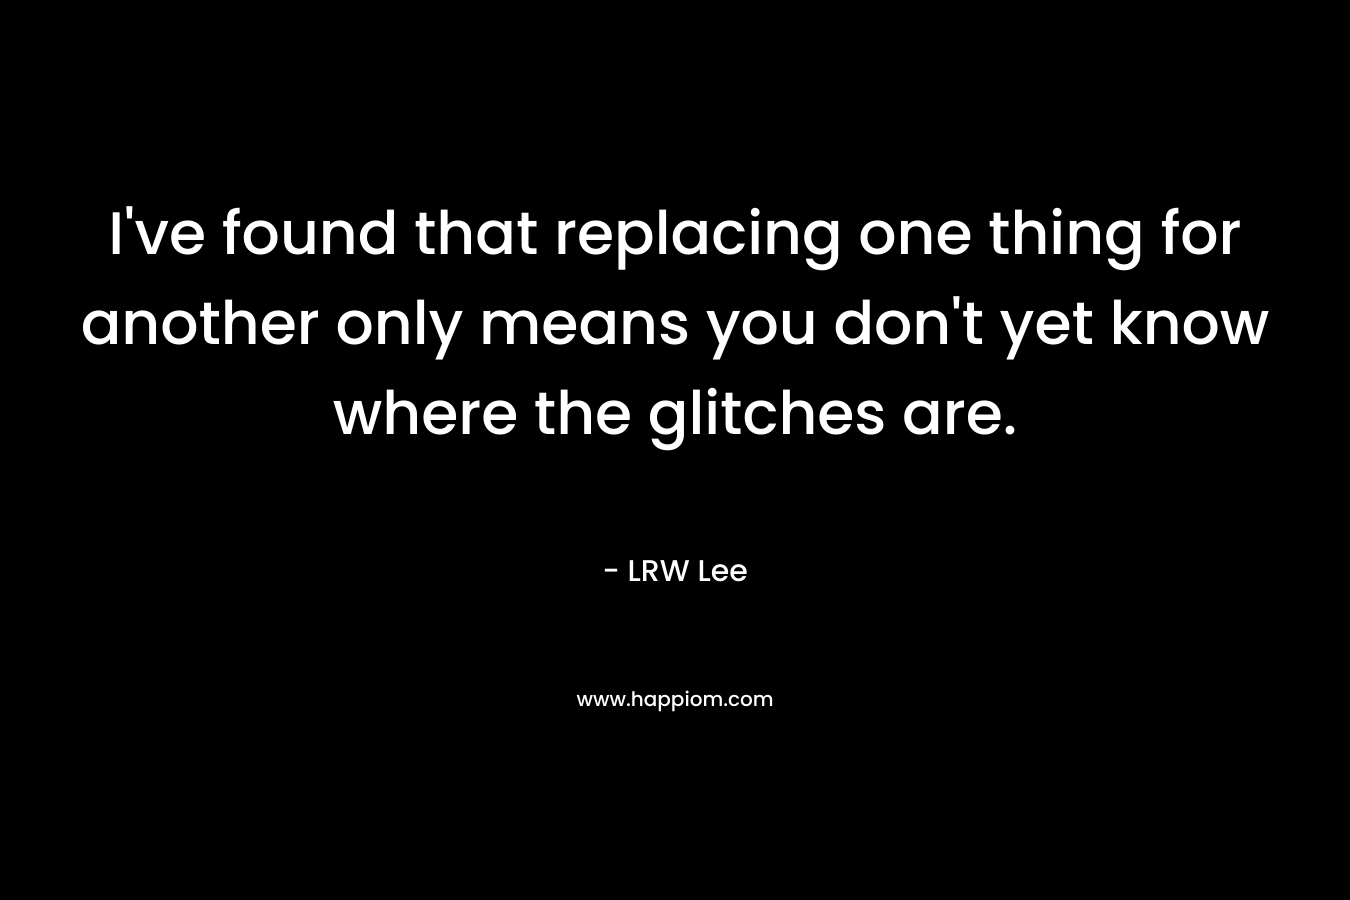 I've found that replacing one thing for another only means you don't yet know where the glitches are.